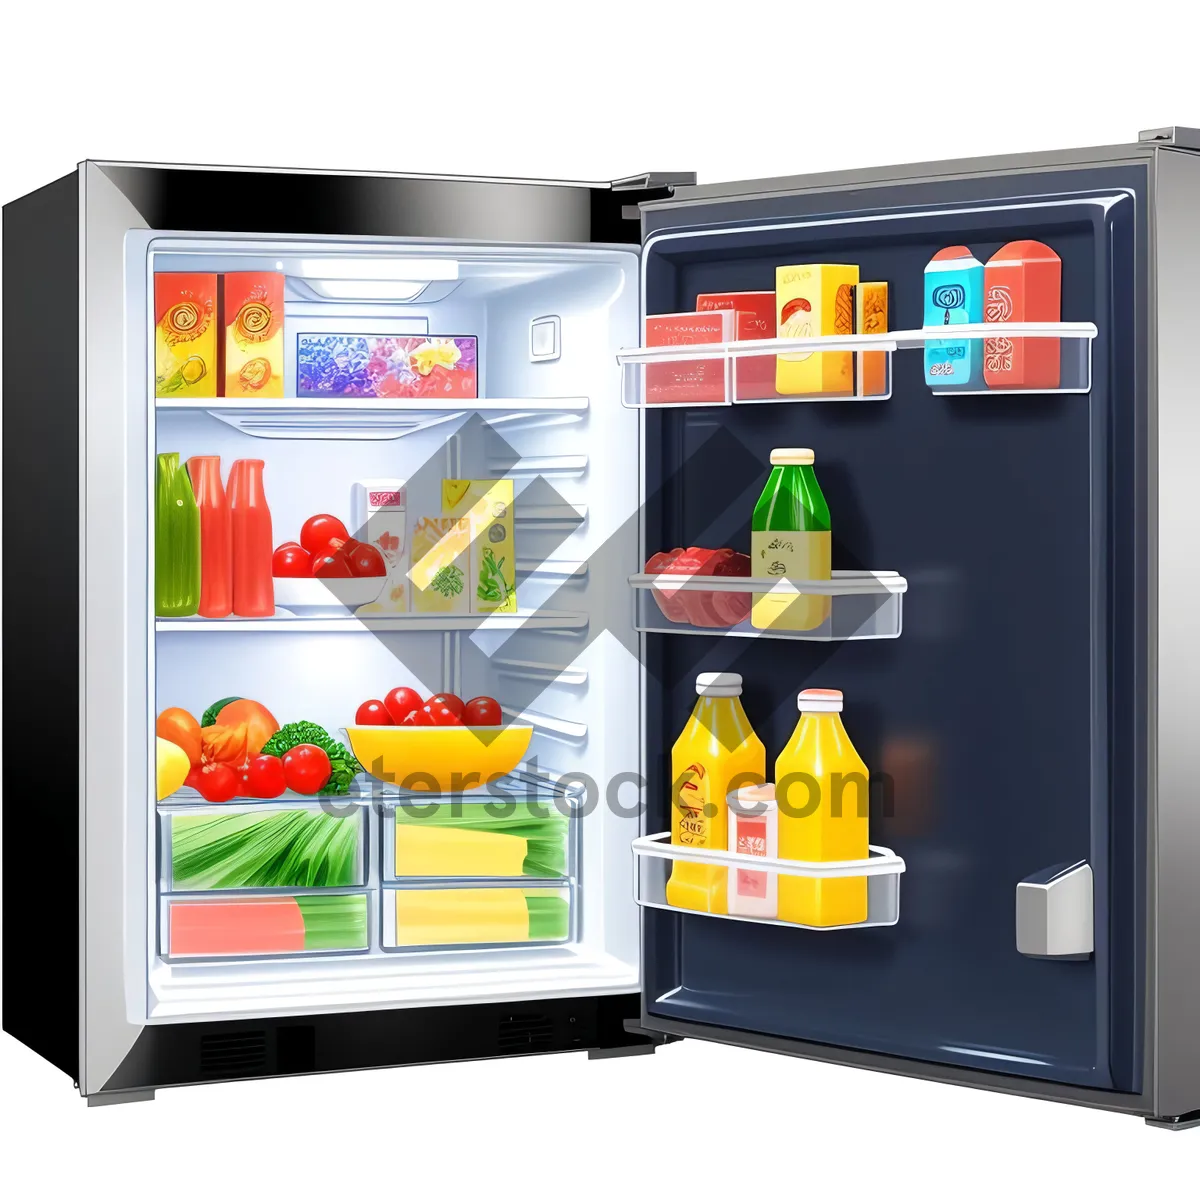 Picture of Cutting-Edge Buffet Refrigeration System for Efficient Cooling